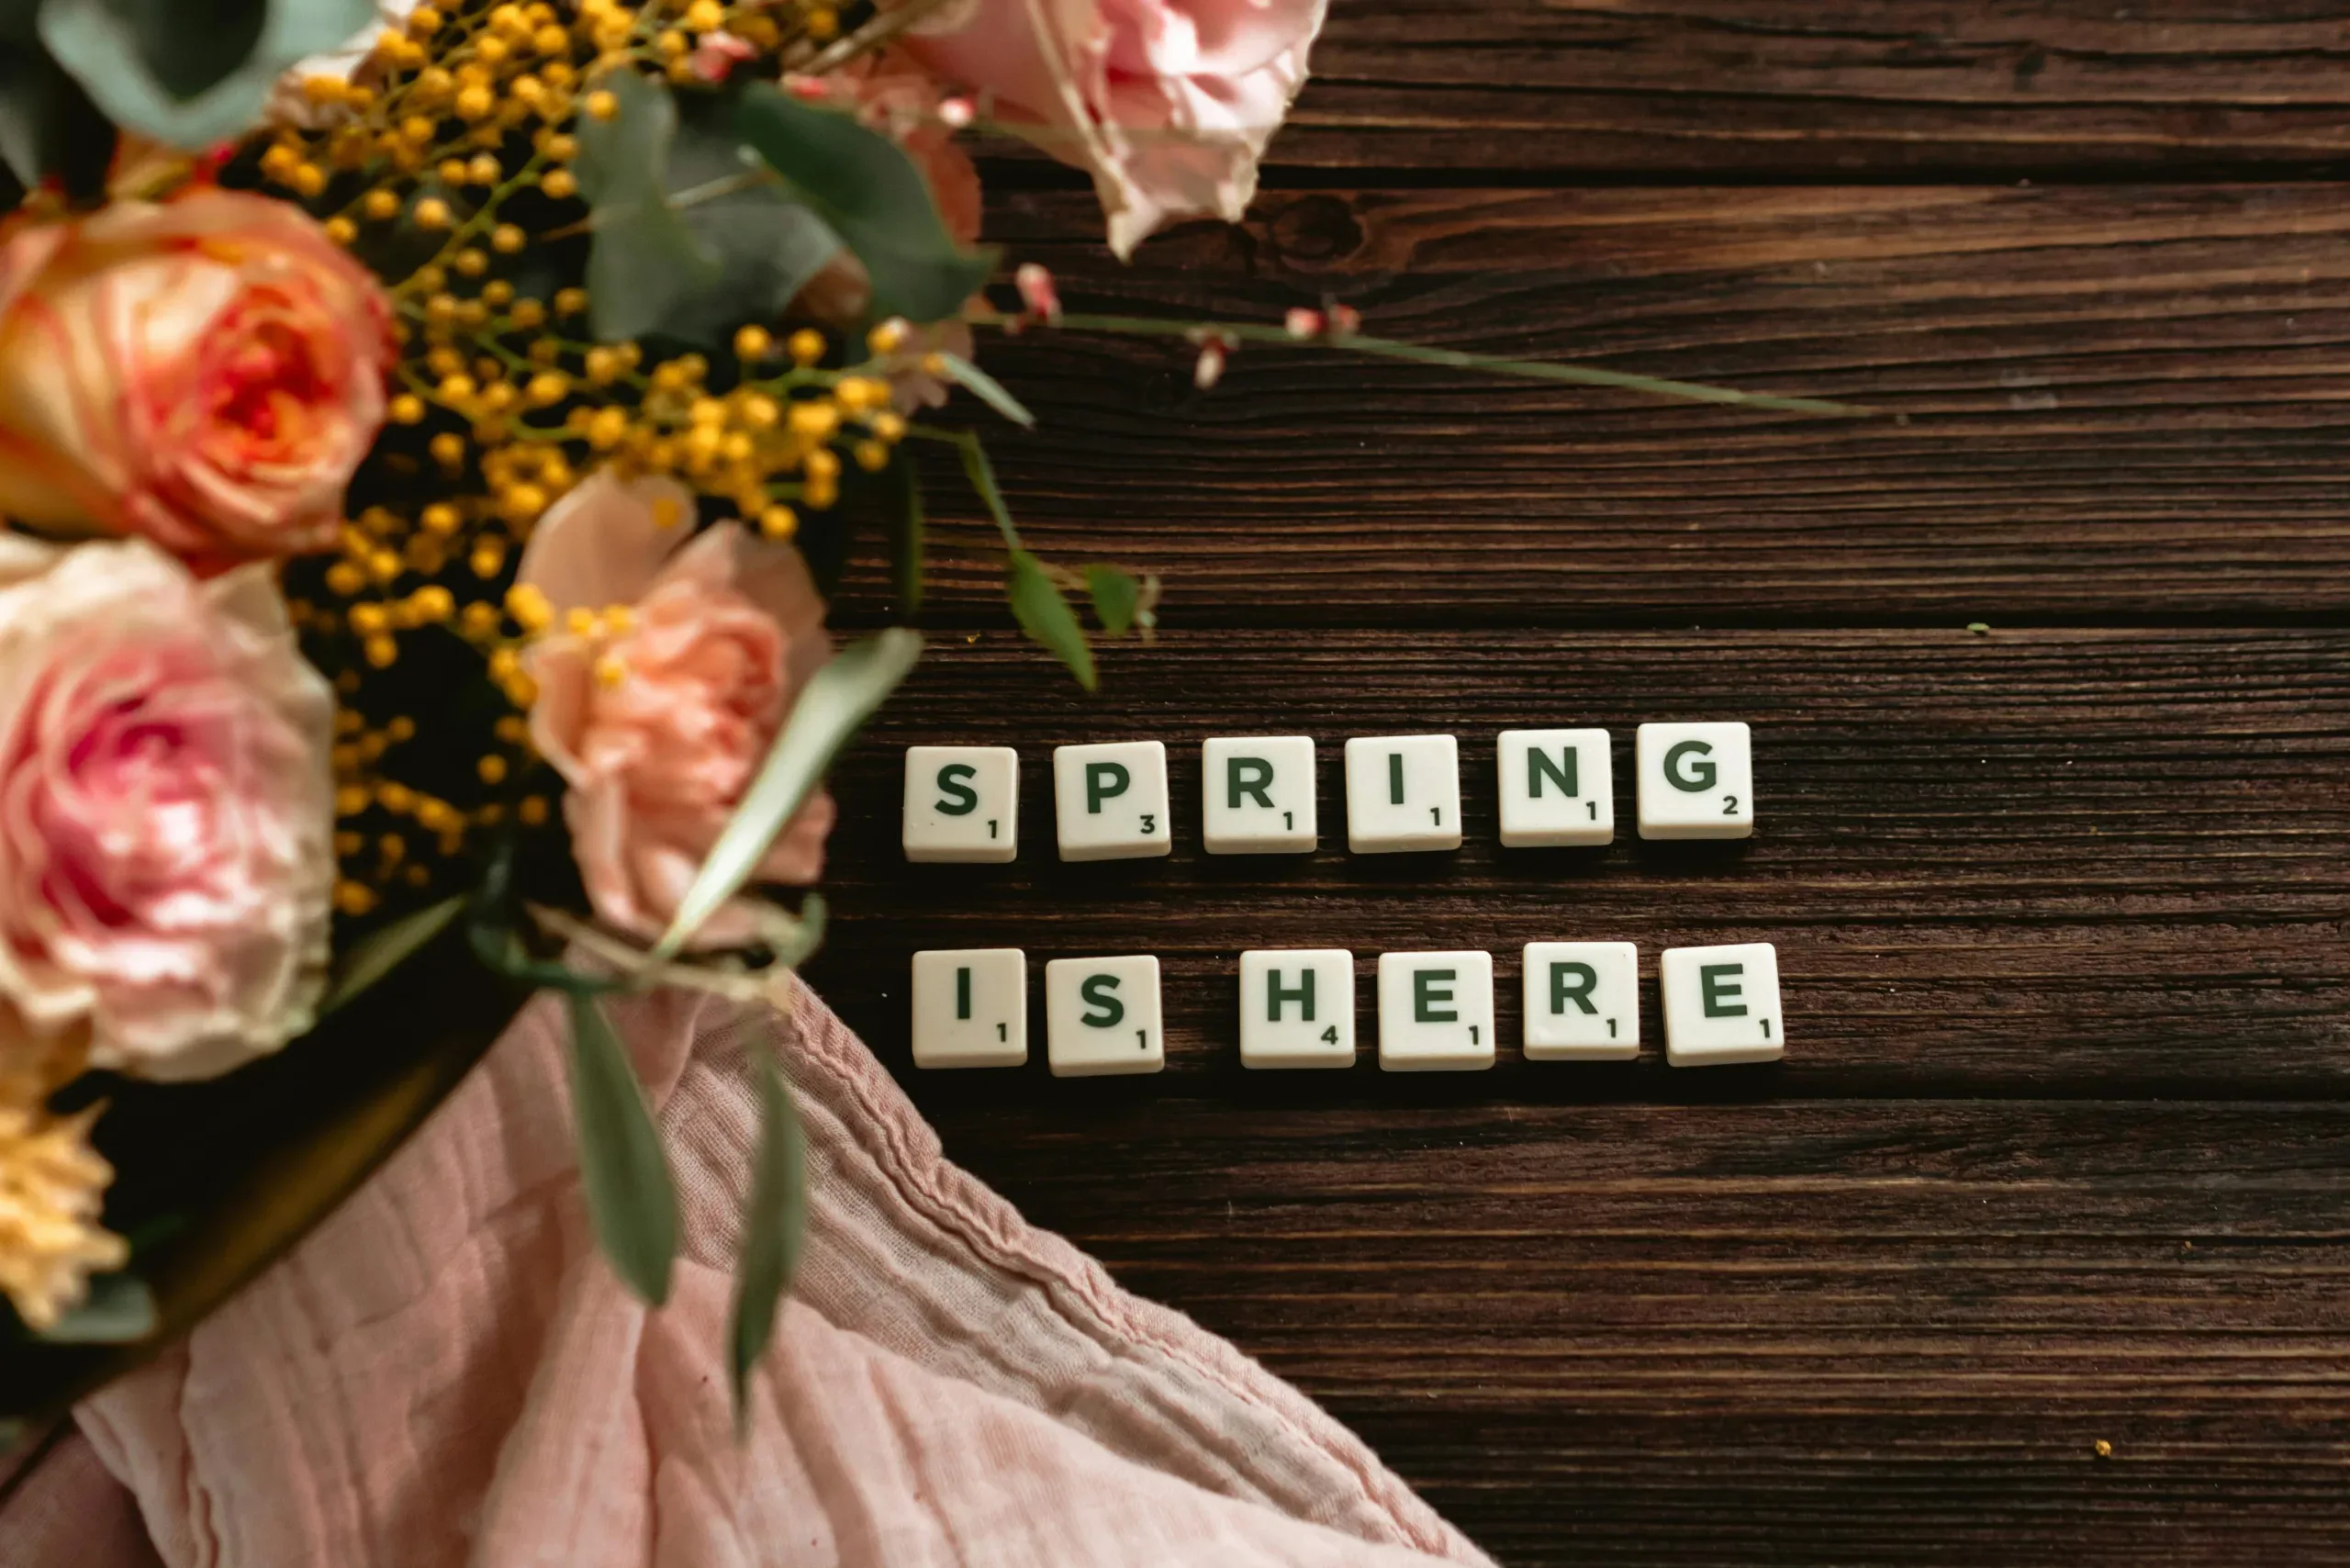 scrabble pieces spell out "spring is here" aside flowers